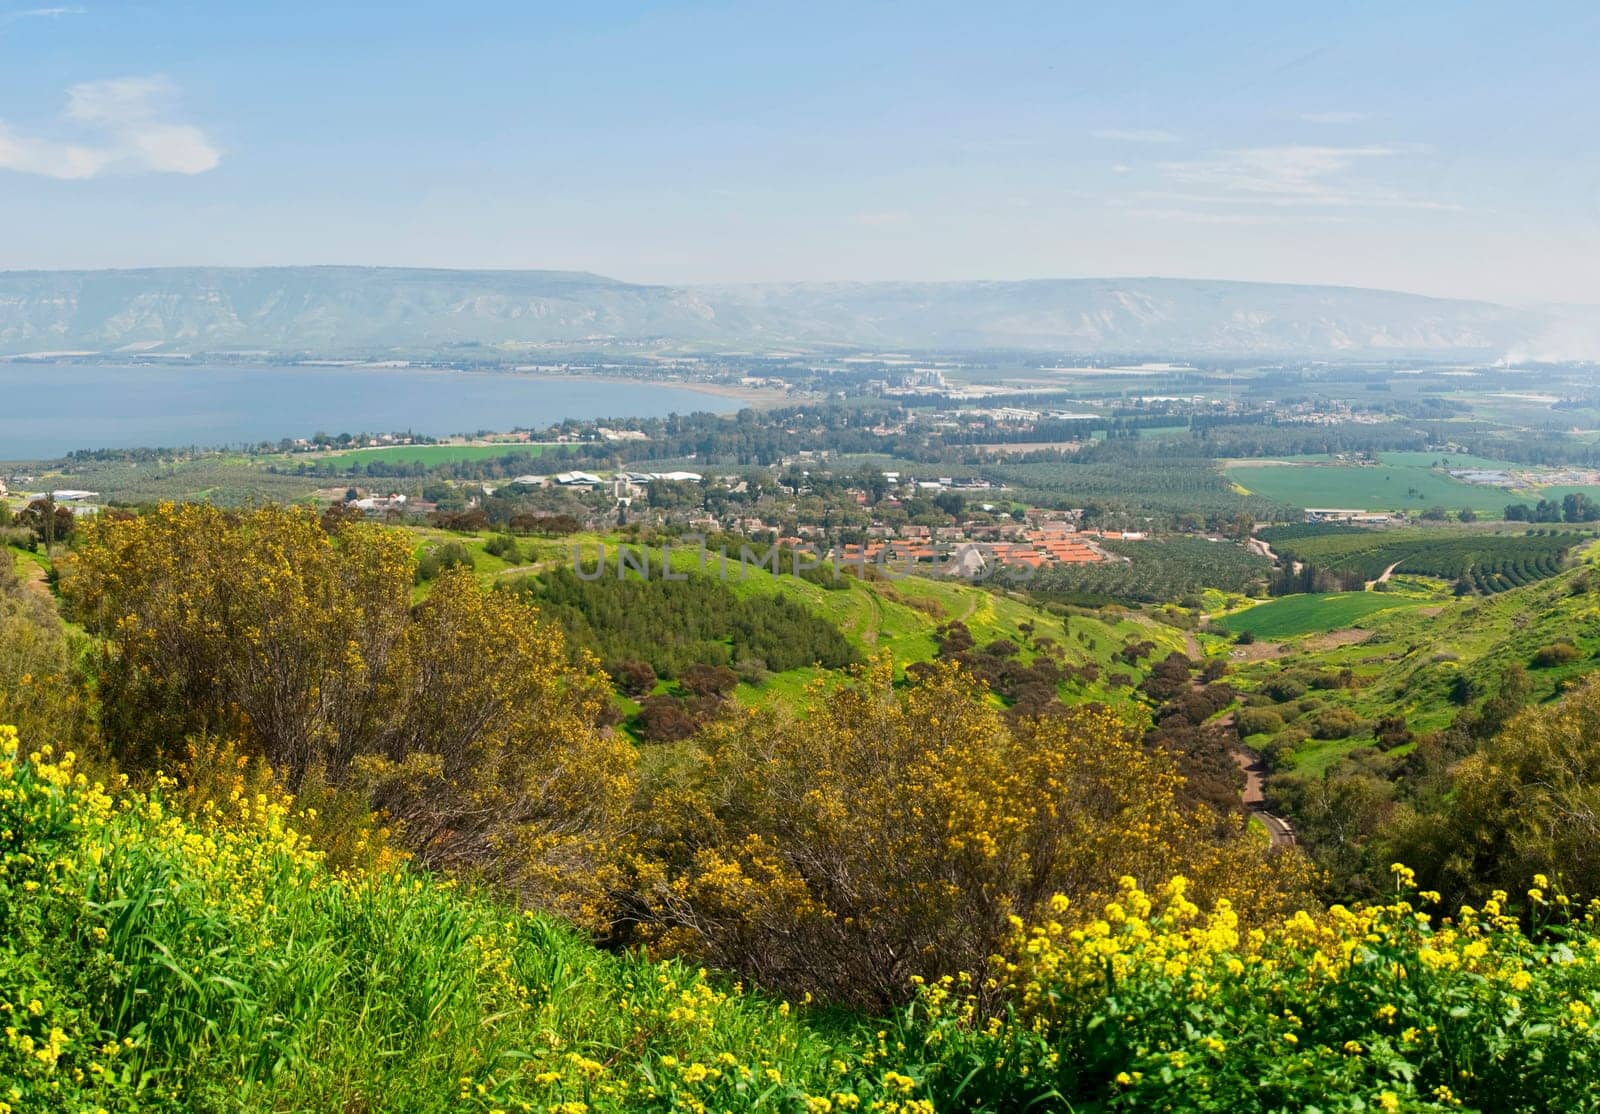 Galilee and Jordan valley, Israel by aprilphoto